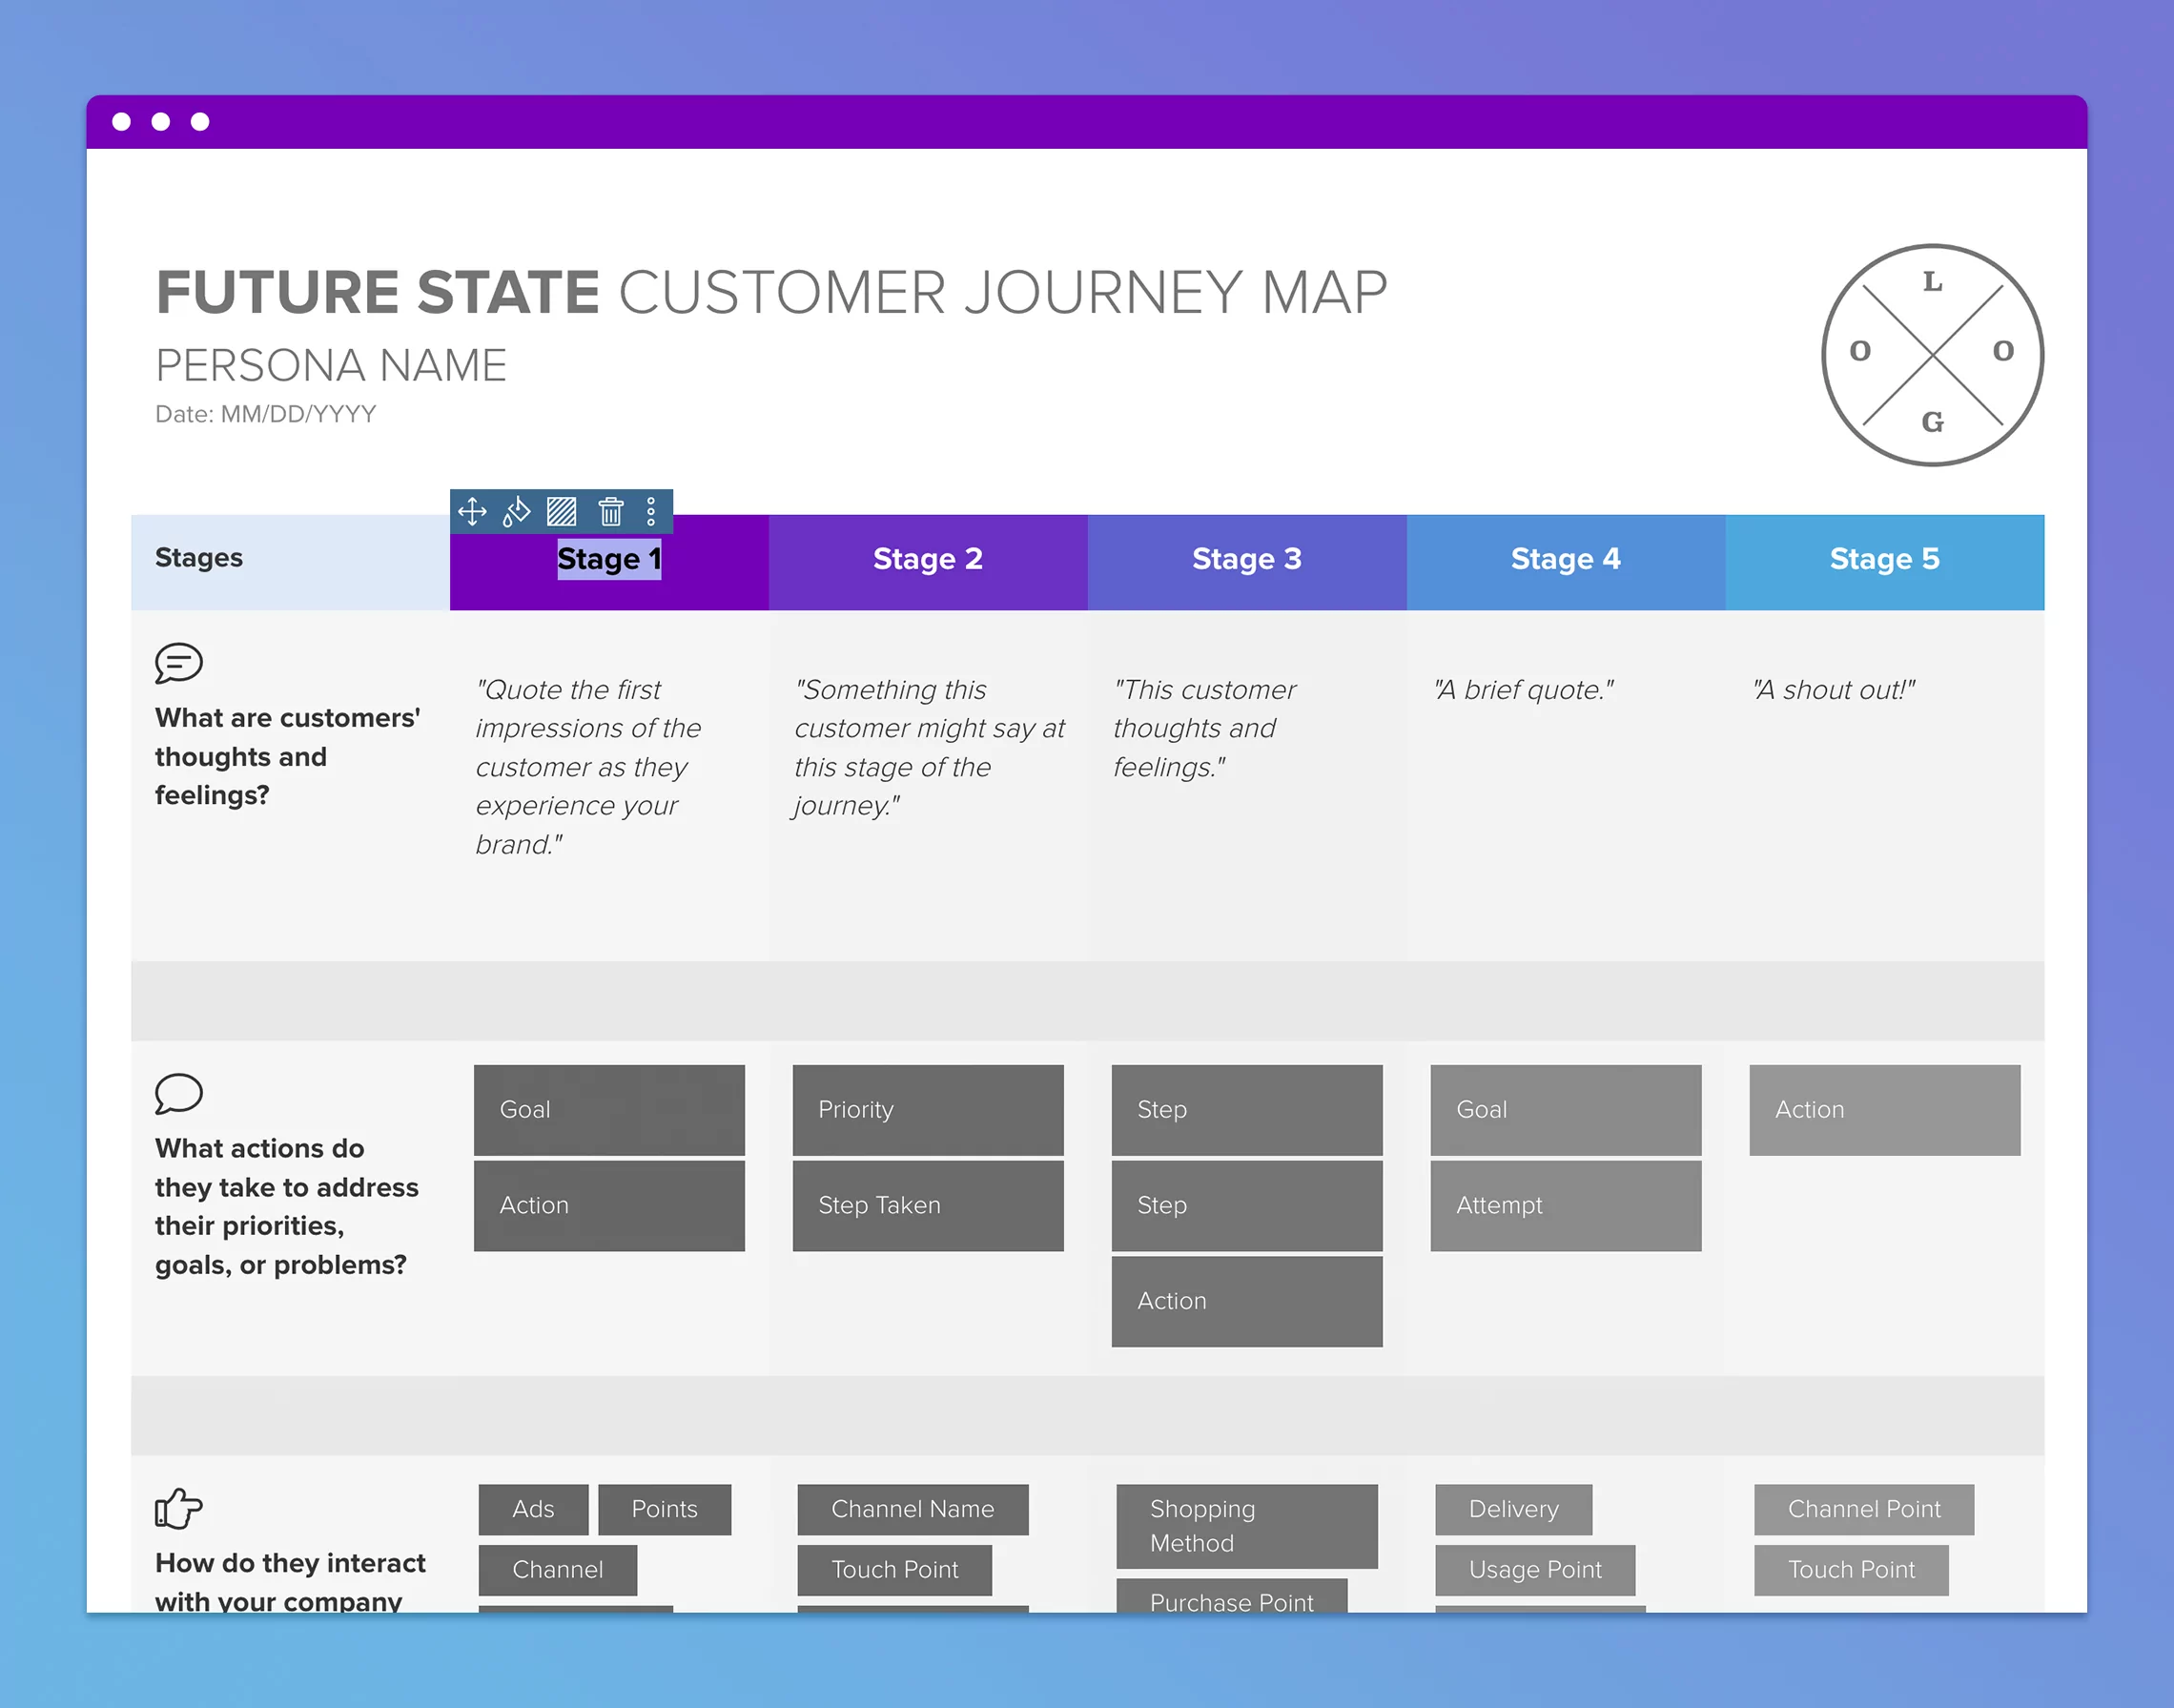 Stages | Future State Customer Journey